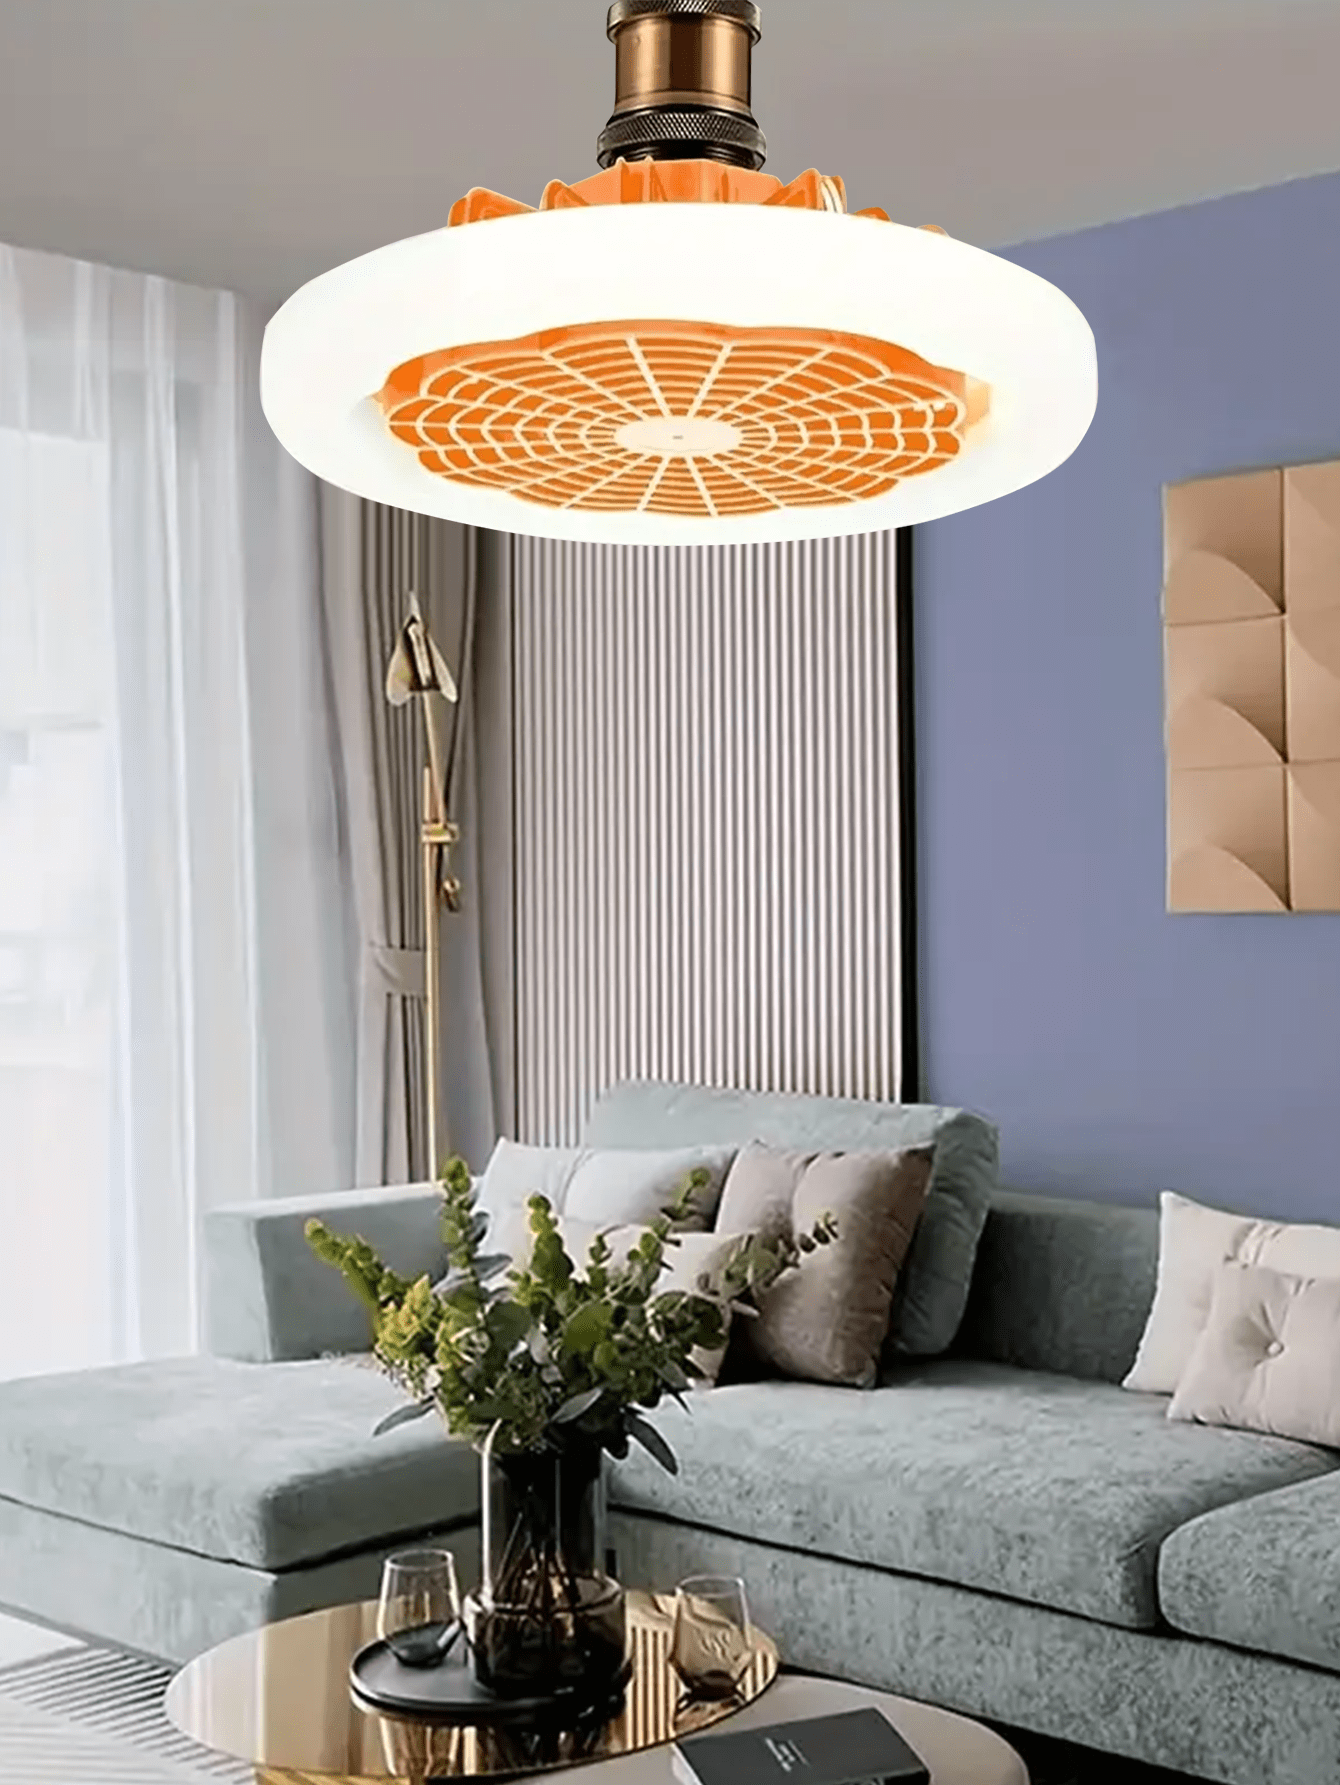 1pc 216mm Orange Ceiling Fan Light With Remote Control, Low Profile With Light, 3 Speeds, Led Dimmable, 3 Colors, 8 Invisible Bladeless Fan Light, Suitable For Bedroom And Office-Orange-3